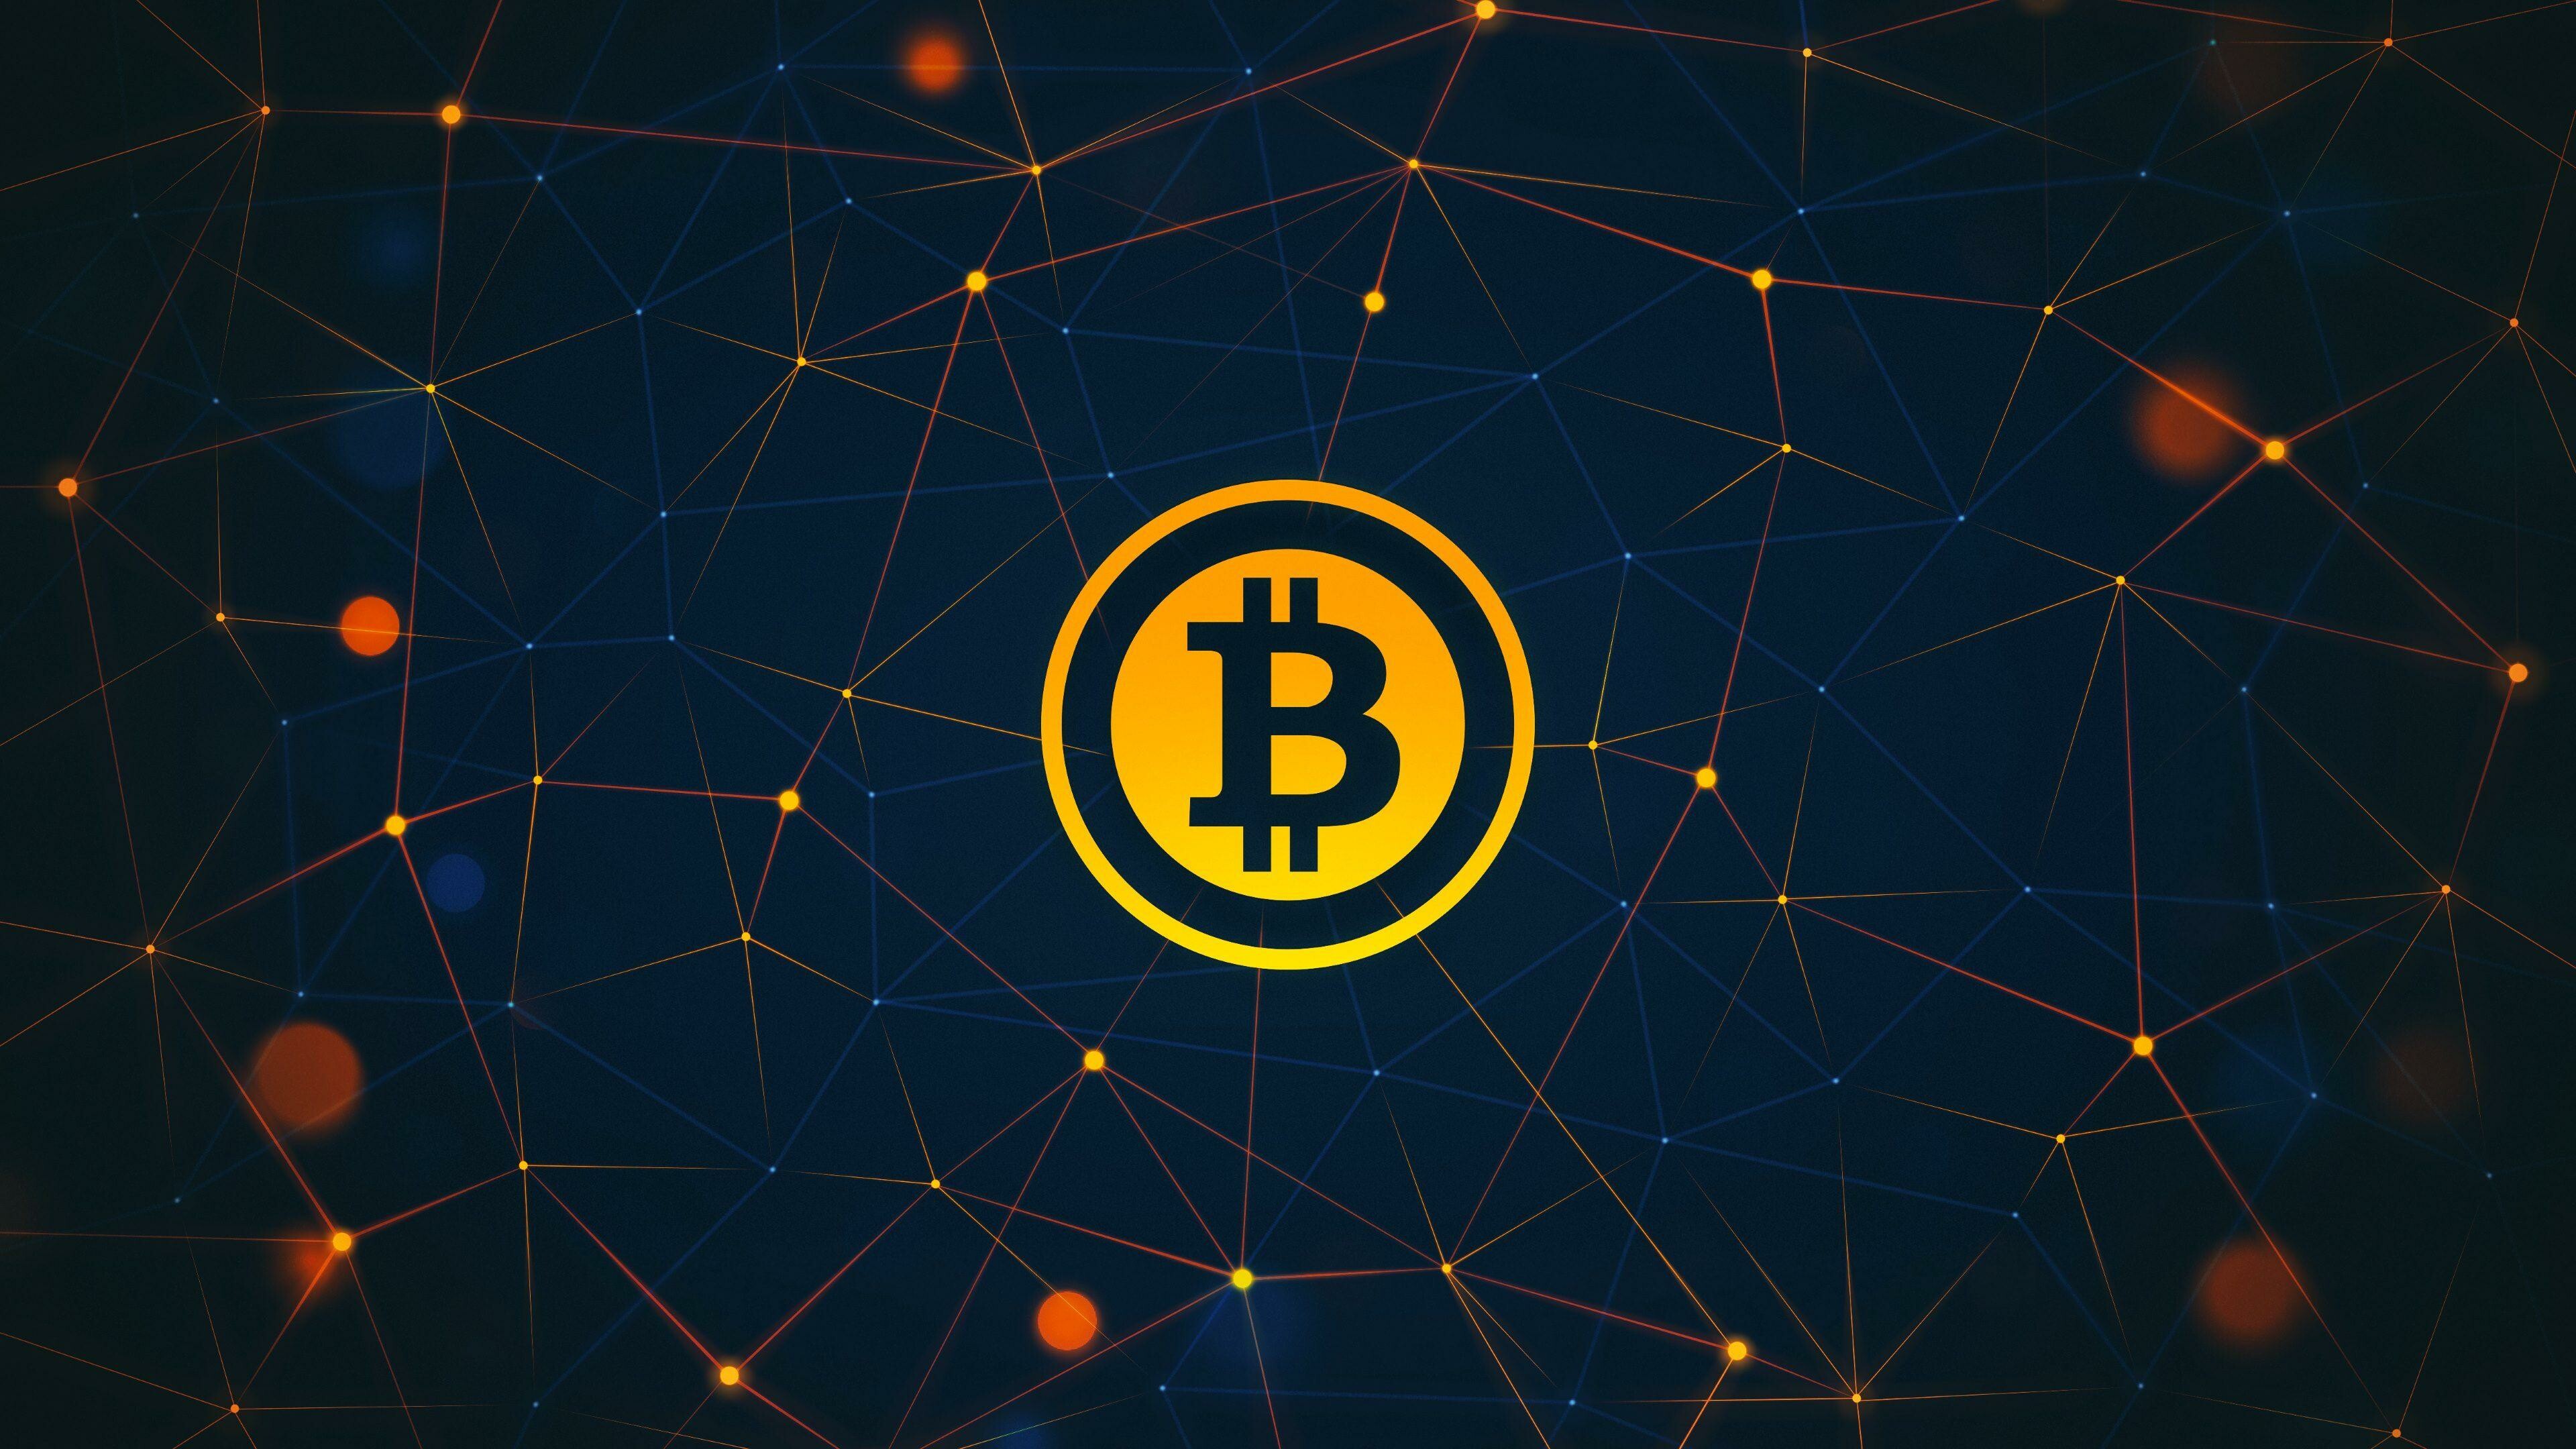 Bitcoin: A type of digital currency, BTC. 3840x2160 4K Wallpaper.